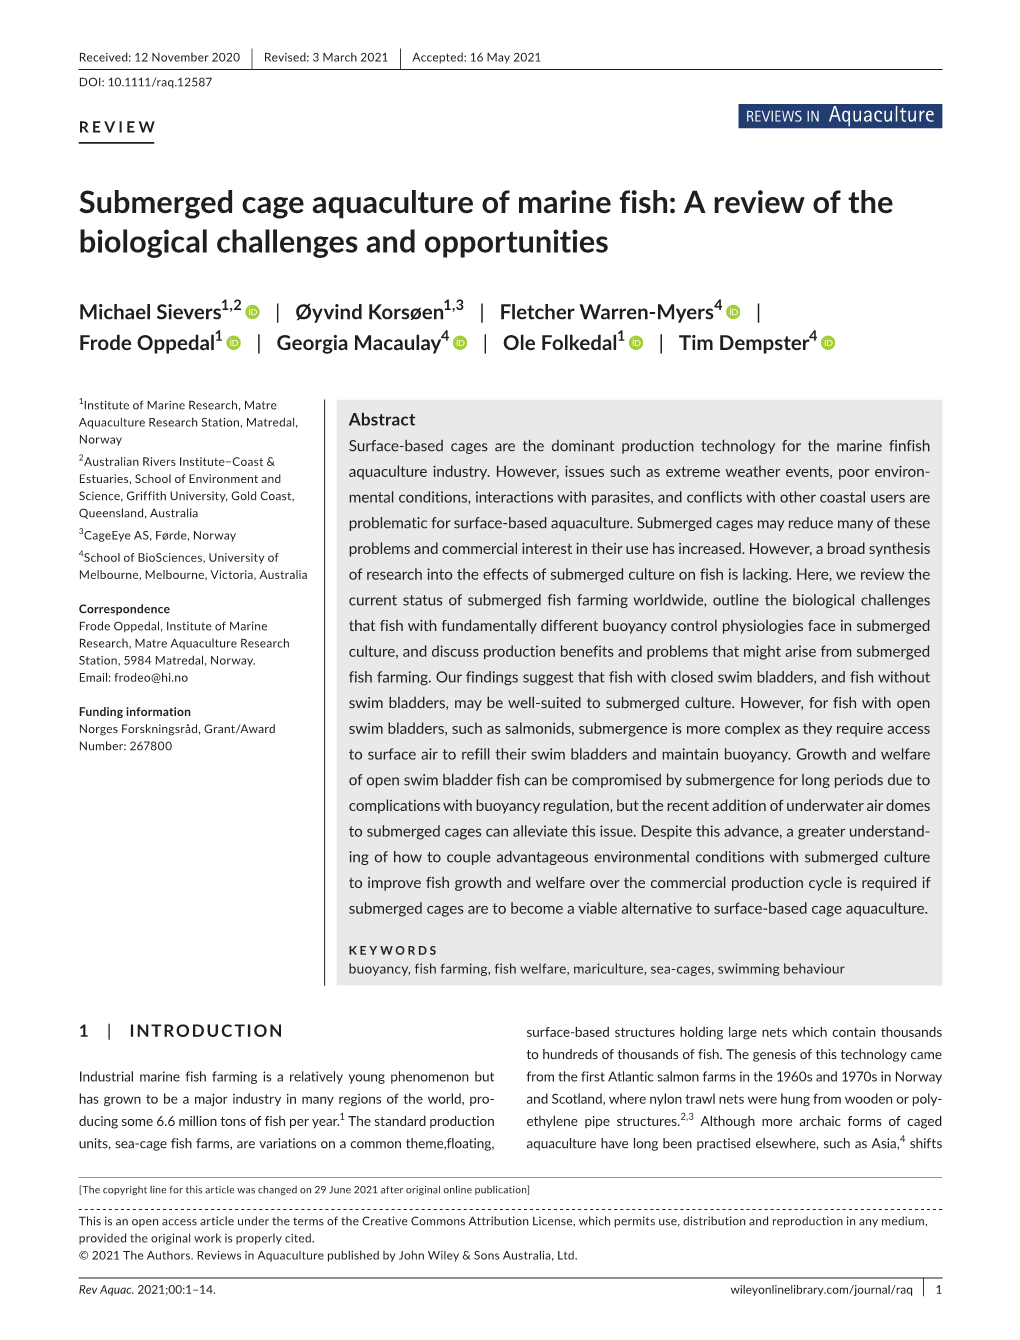 Submerged Cage Aquaculture of Marine Fish: a Review of the Biological Challenges and Opportunities